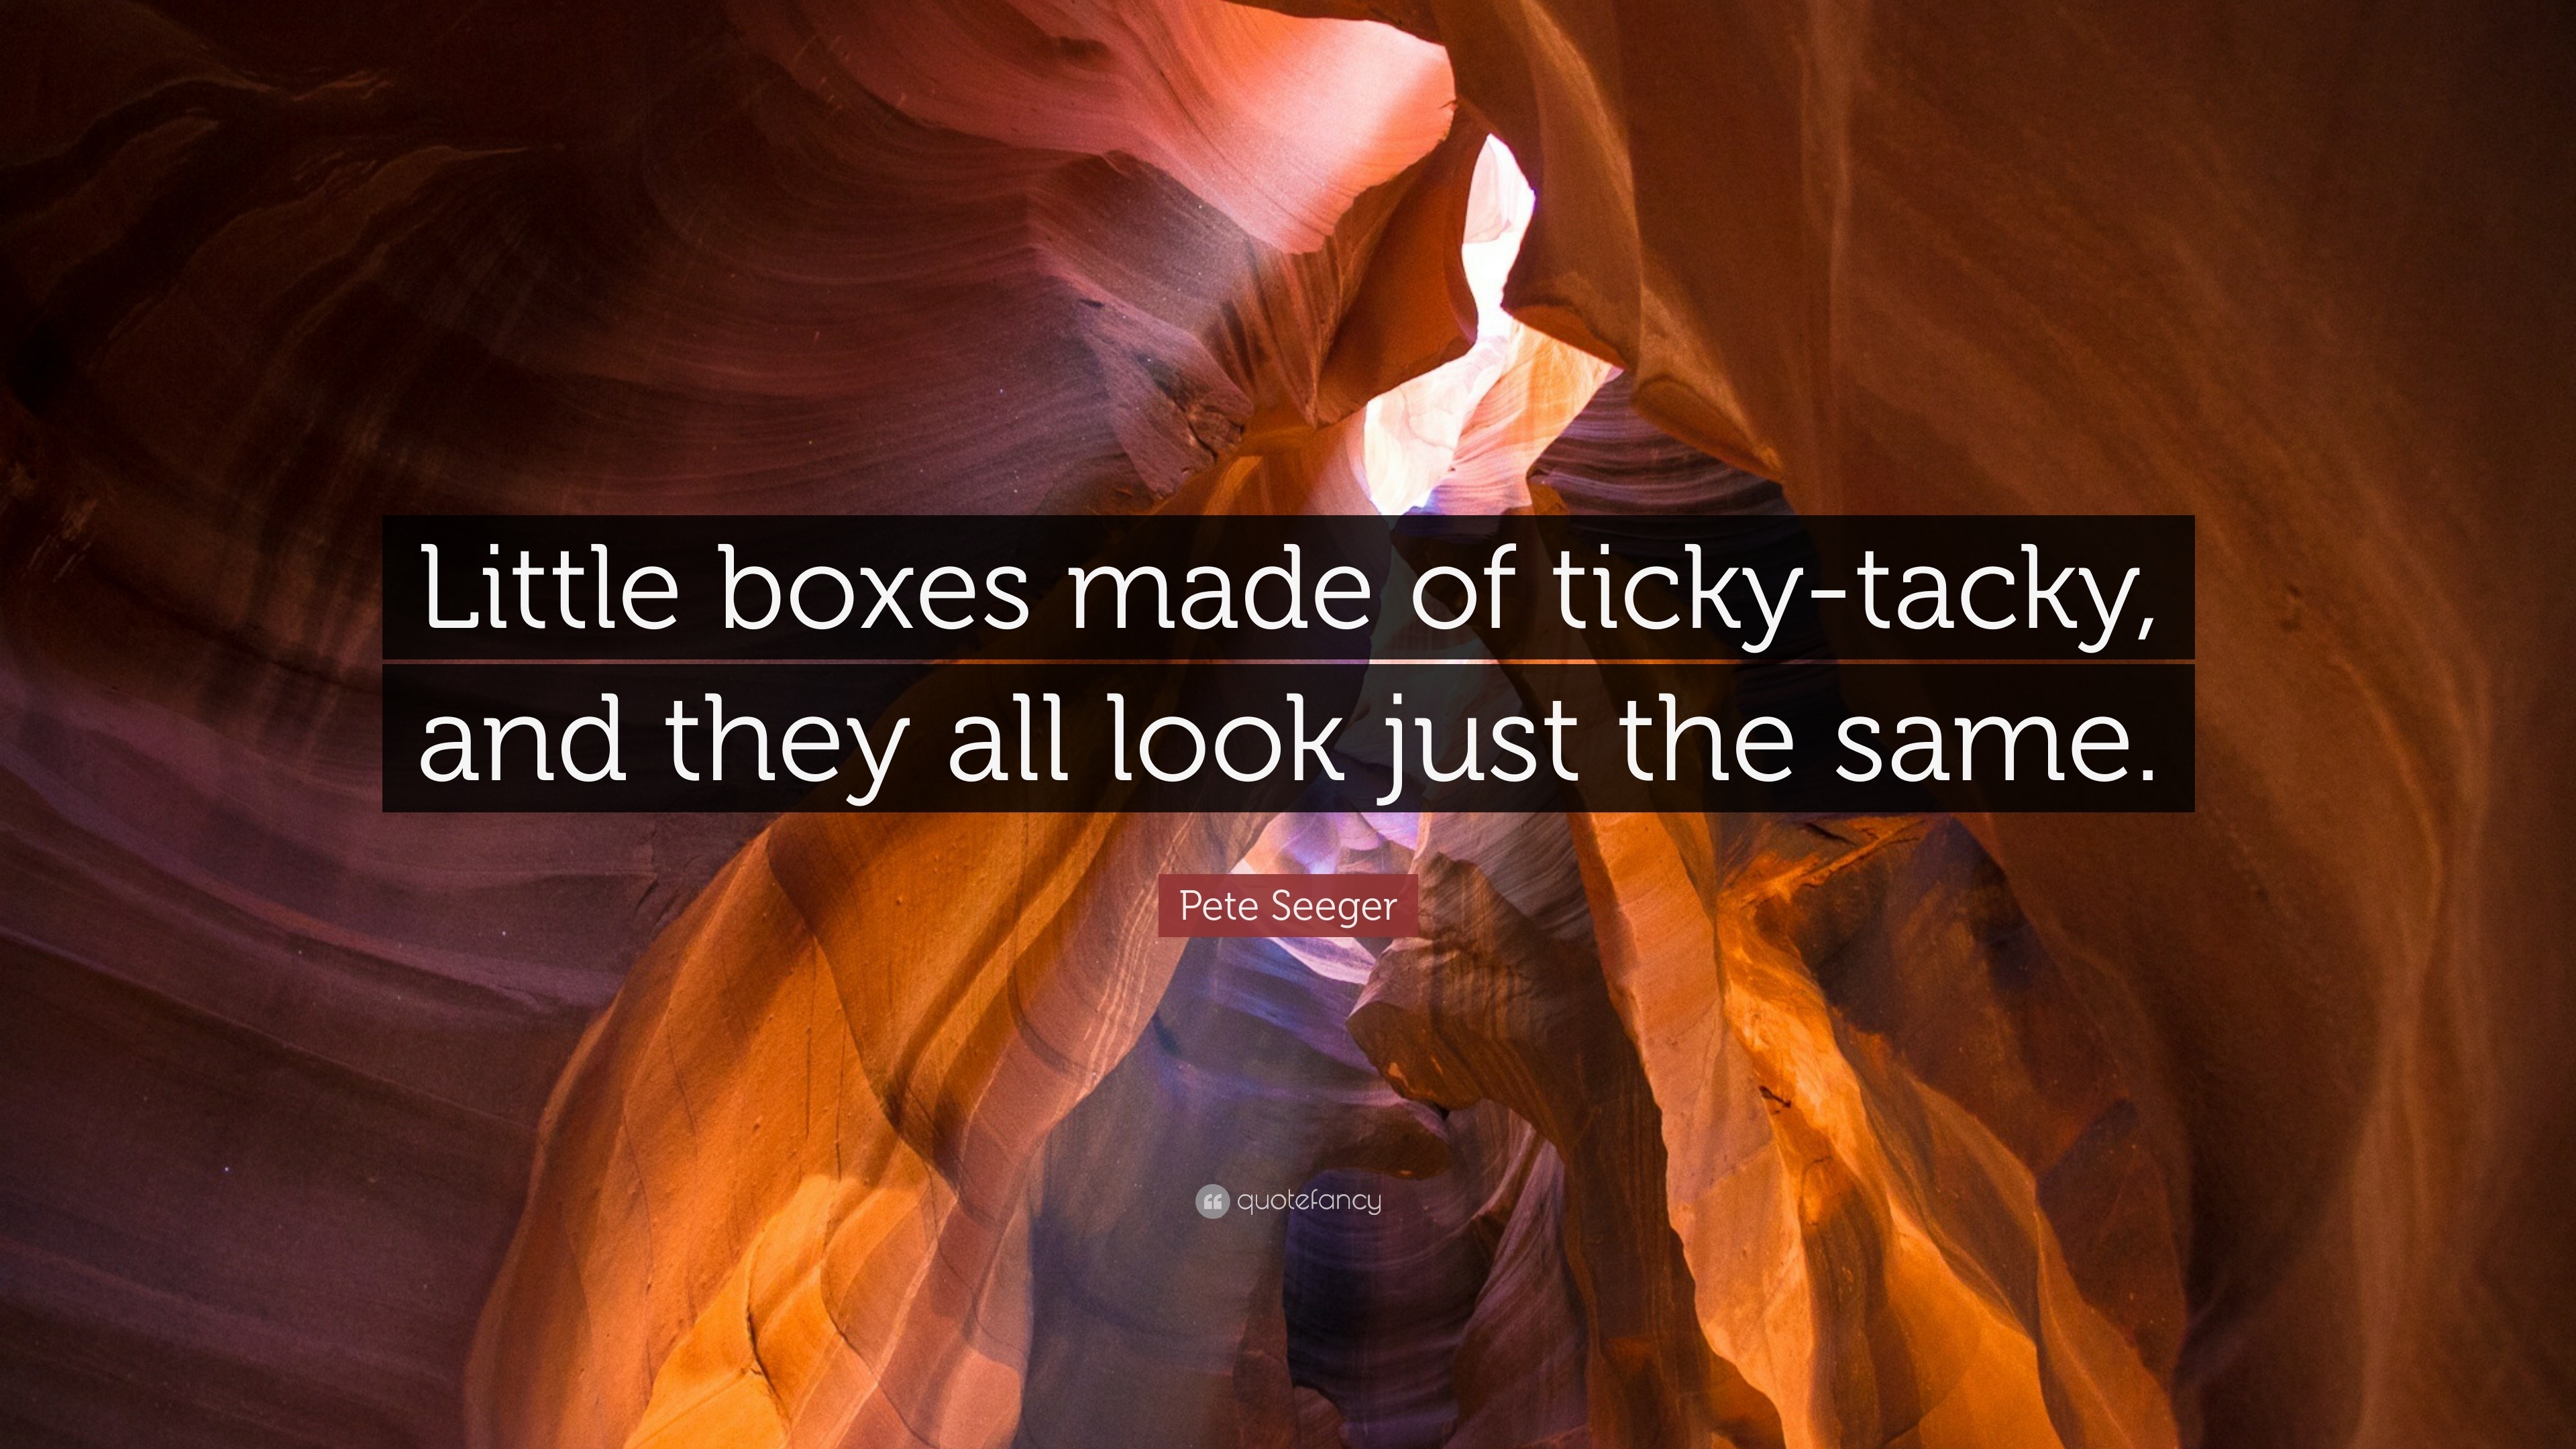 Pete Seeger Quote Little Boxes Made Of Ticky Tacky And They All Look Just The Same 7 Wallpapers Quotefancy